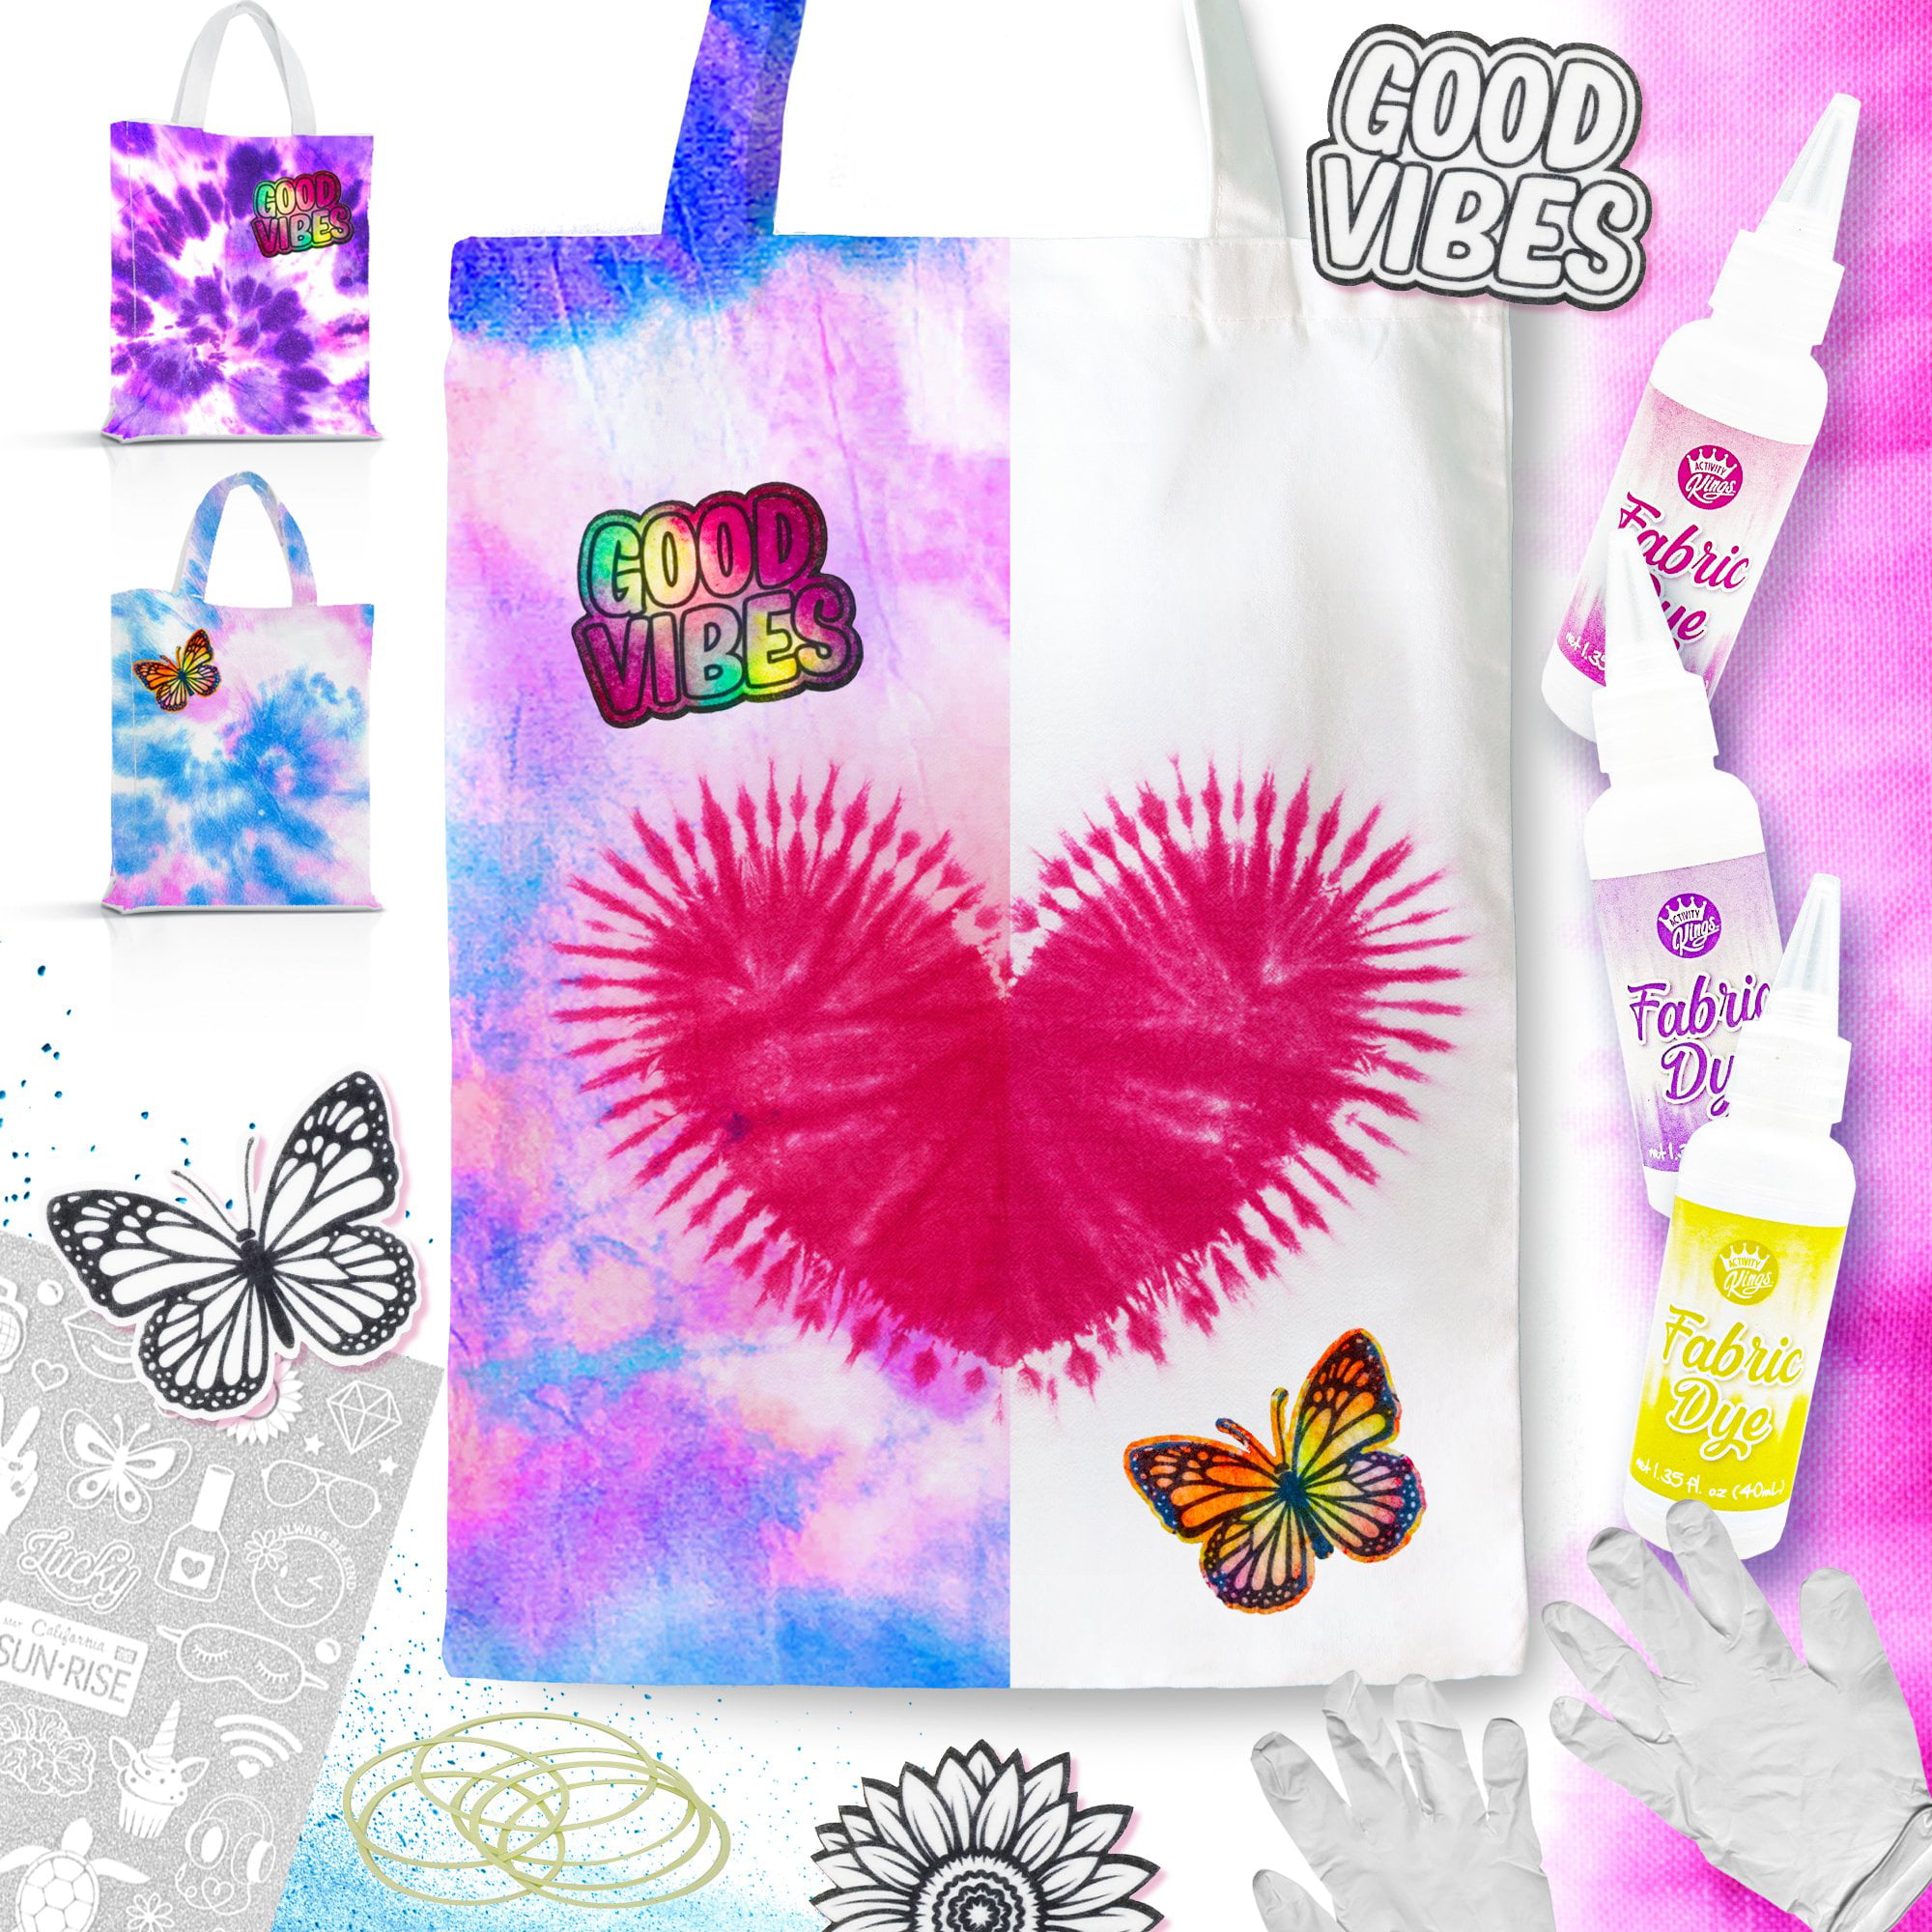 Tie Dye Kit With Cushion Cover And Canvas Bag,Vibrant Tie Dye Paint Perfect Gift 